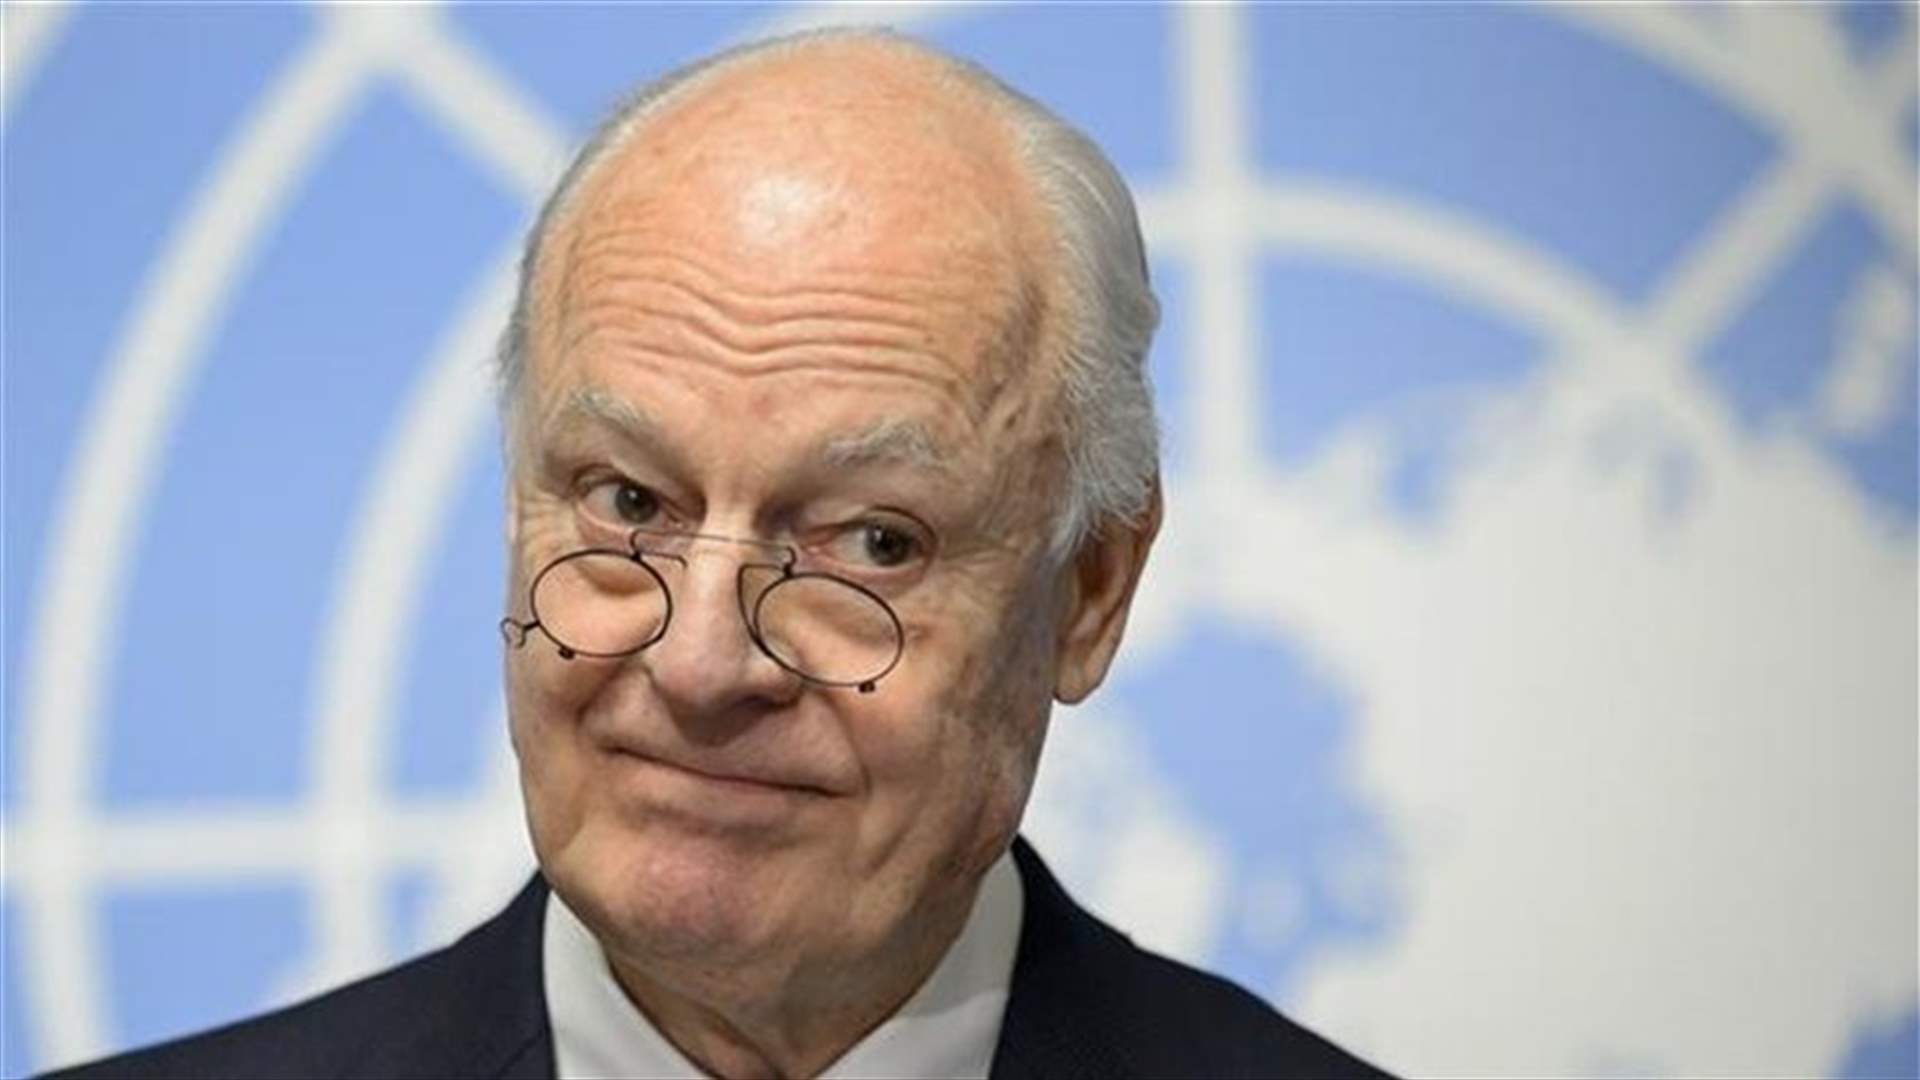 Common ground emerging on Syria constitution, more talks planned - UN